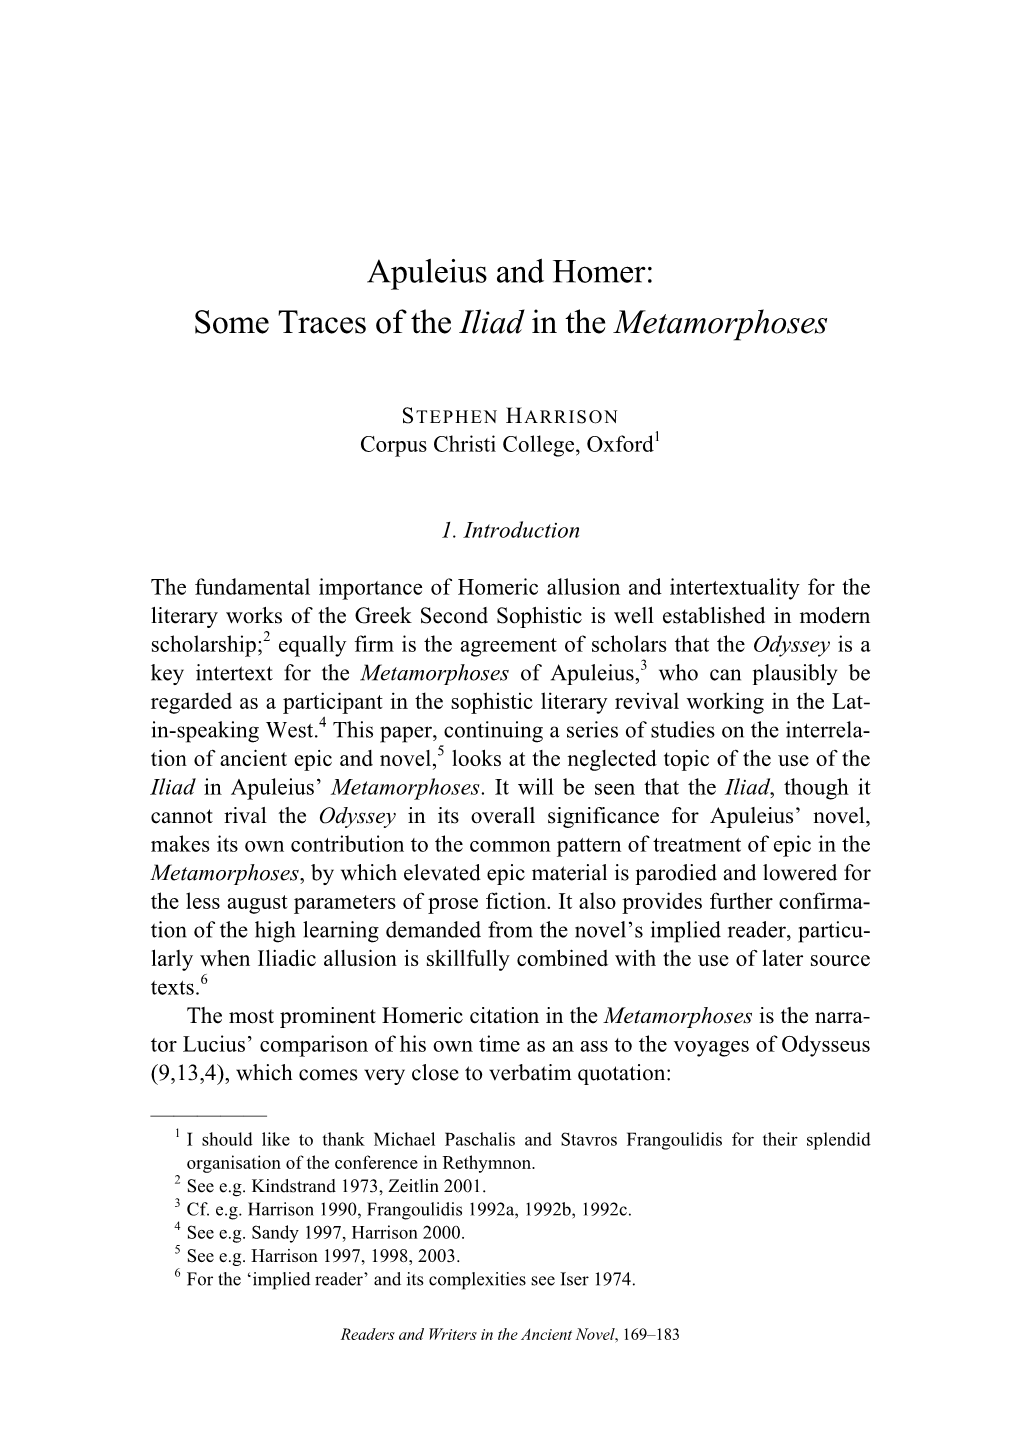 Apuleius and Homer: Some Traces of the Iliad in the Metamorphoses